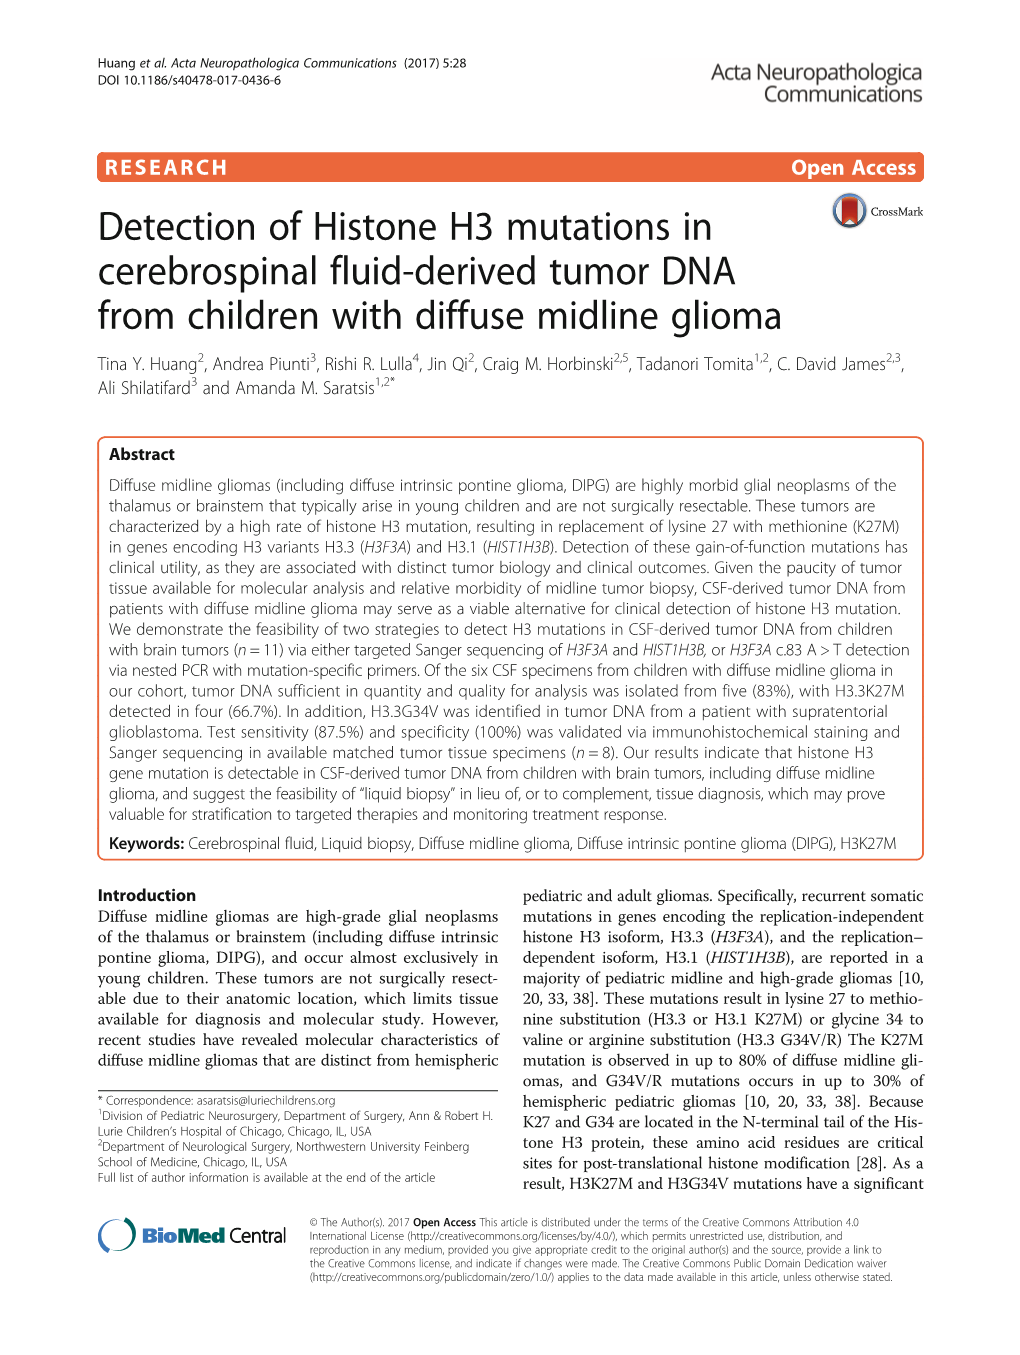 Detection of Histone H3 Mutations in Cerebrospinal Fluid-Derived Tumor DNA from Children with Diffuse Midline Glioma Tina Y